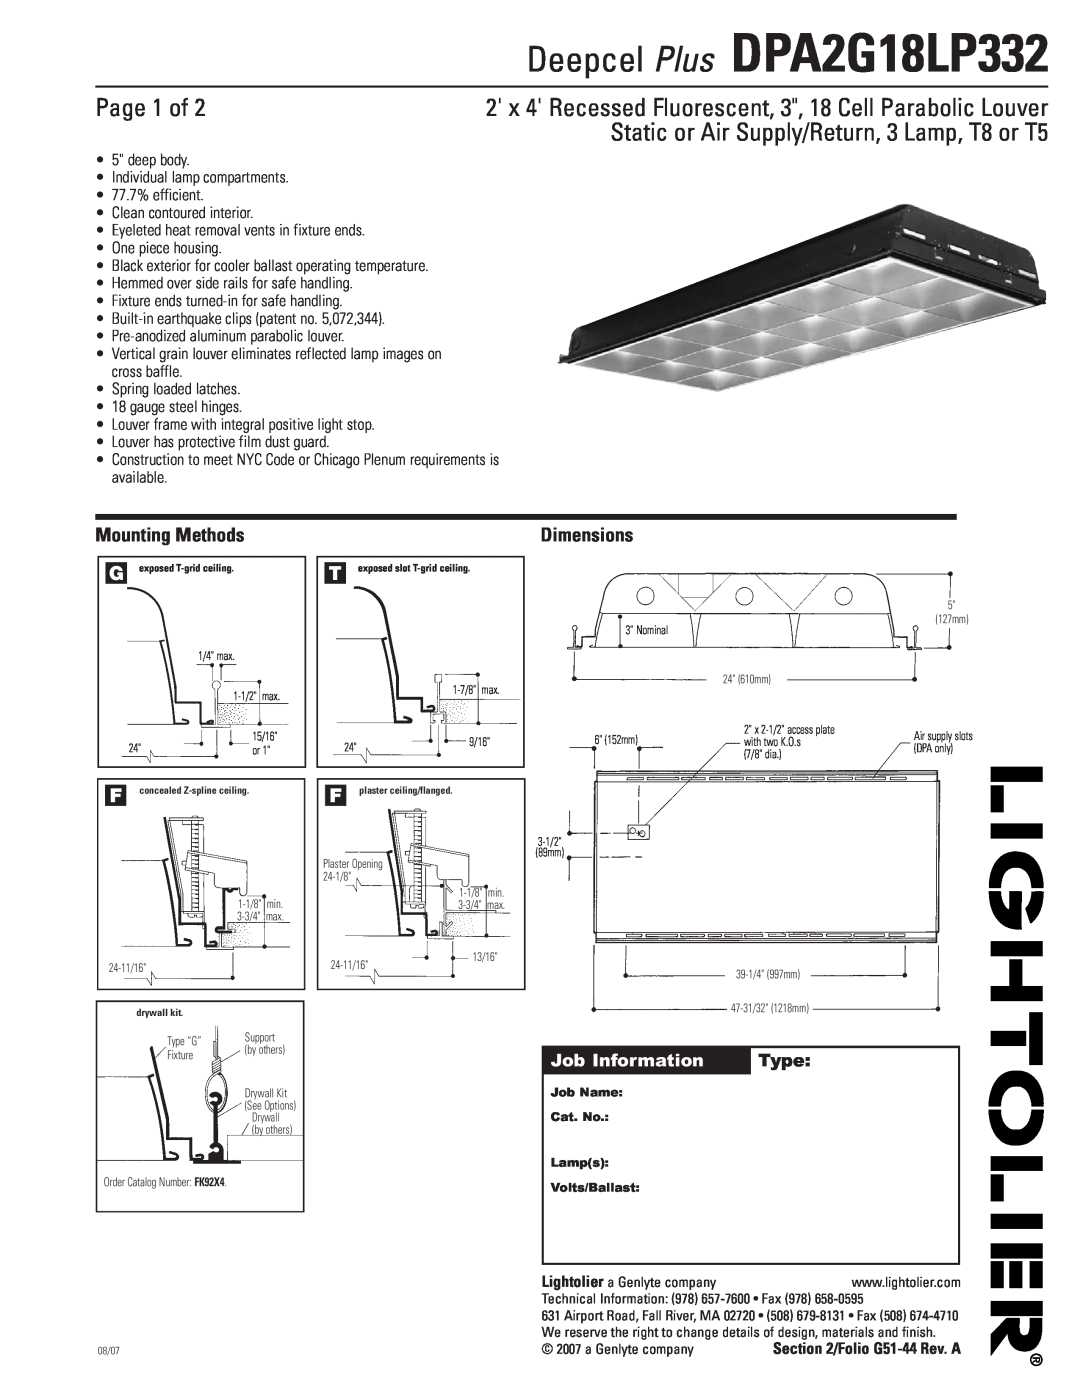 Lightolier DPA2G18LP332 dimensions Page 1 of, Static or Air Supply/Return, 3 Lamp, T8 or T5, Mounting Methods, Dimensions 